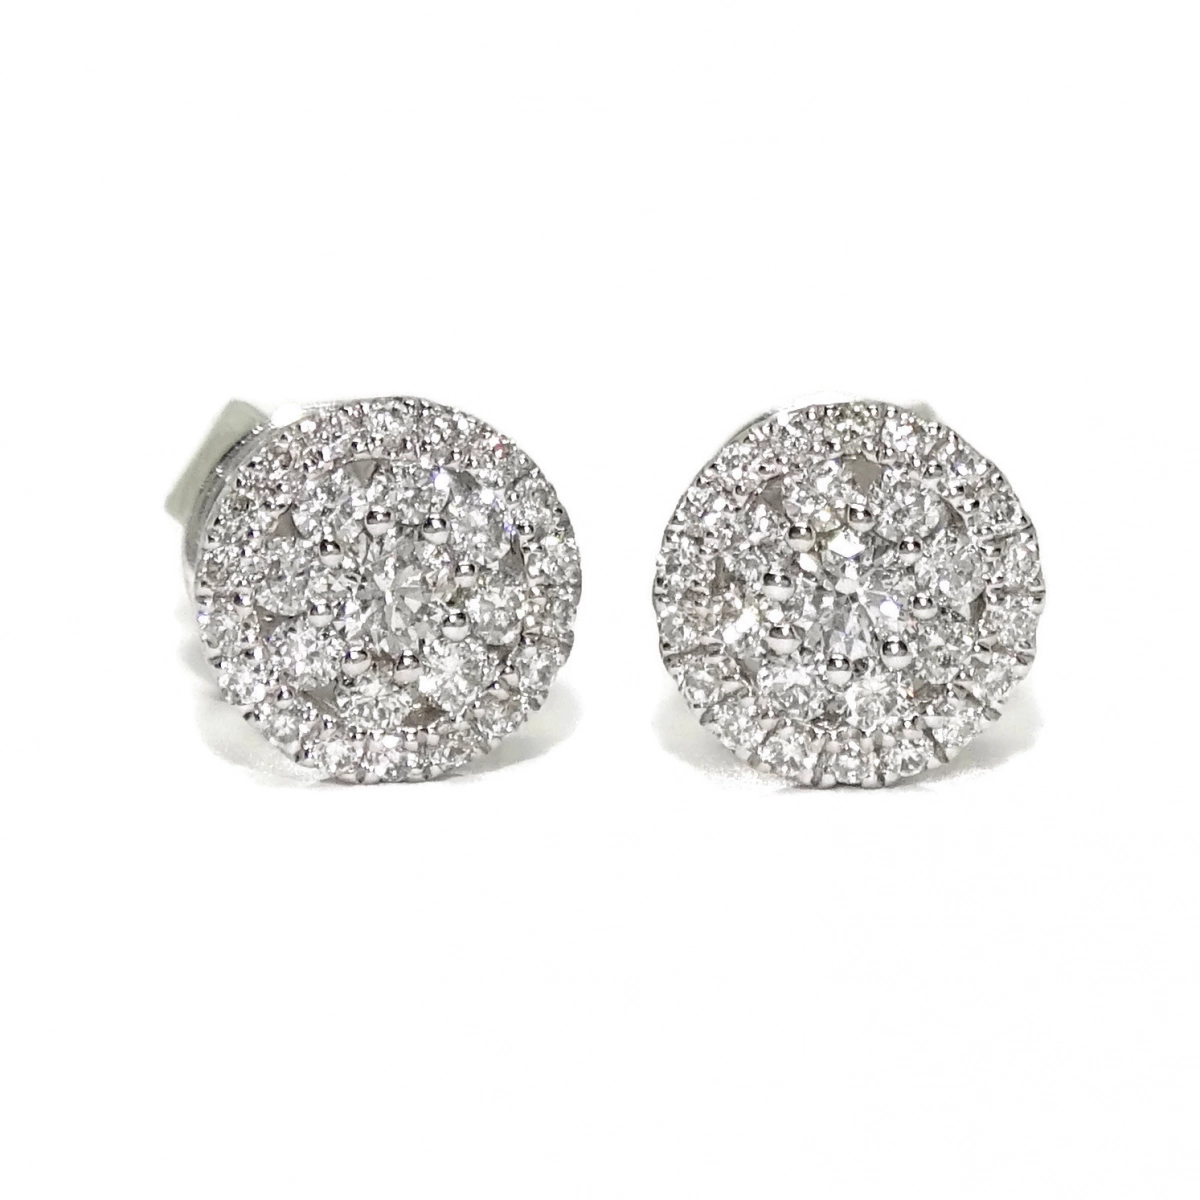 PRECIOUS EARRINGS 0.30 CTS OF DIAMONDS AND WHITE GOLD OF 18K. PRESSURE. 6MM DIAMETER NEVER SAY NEVER